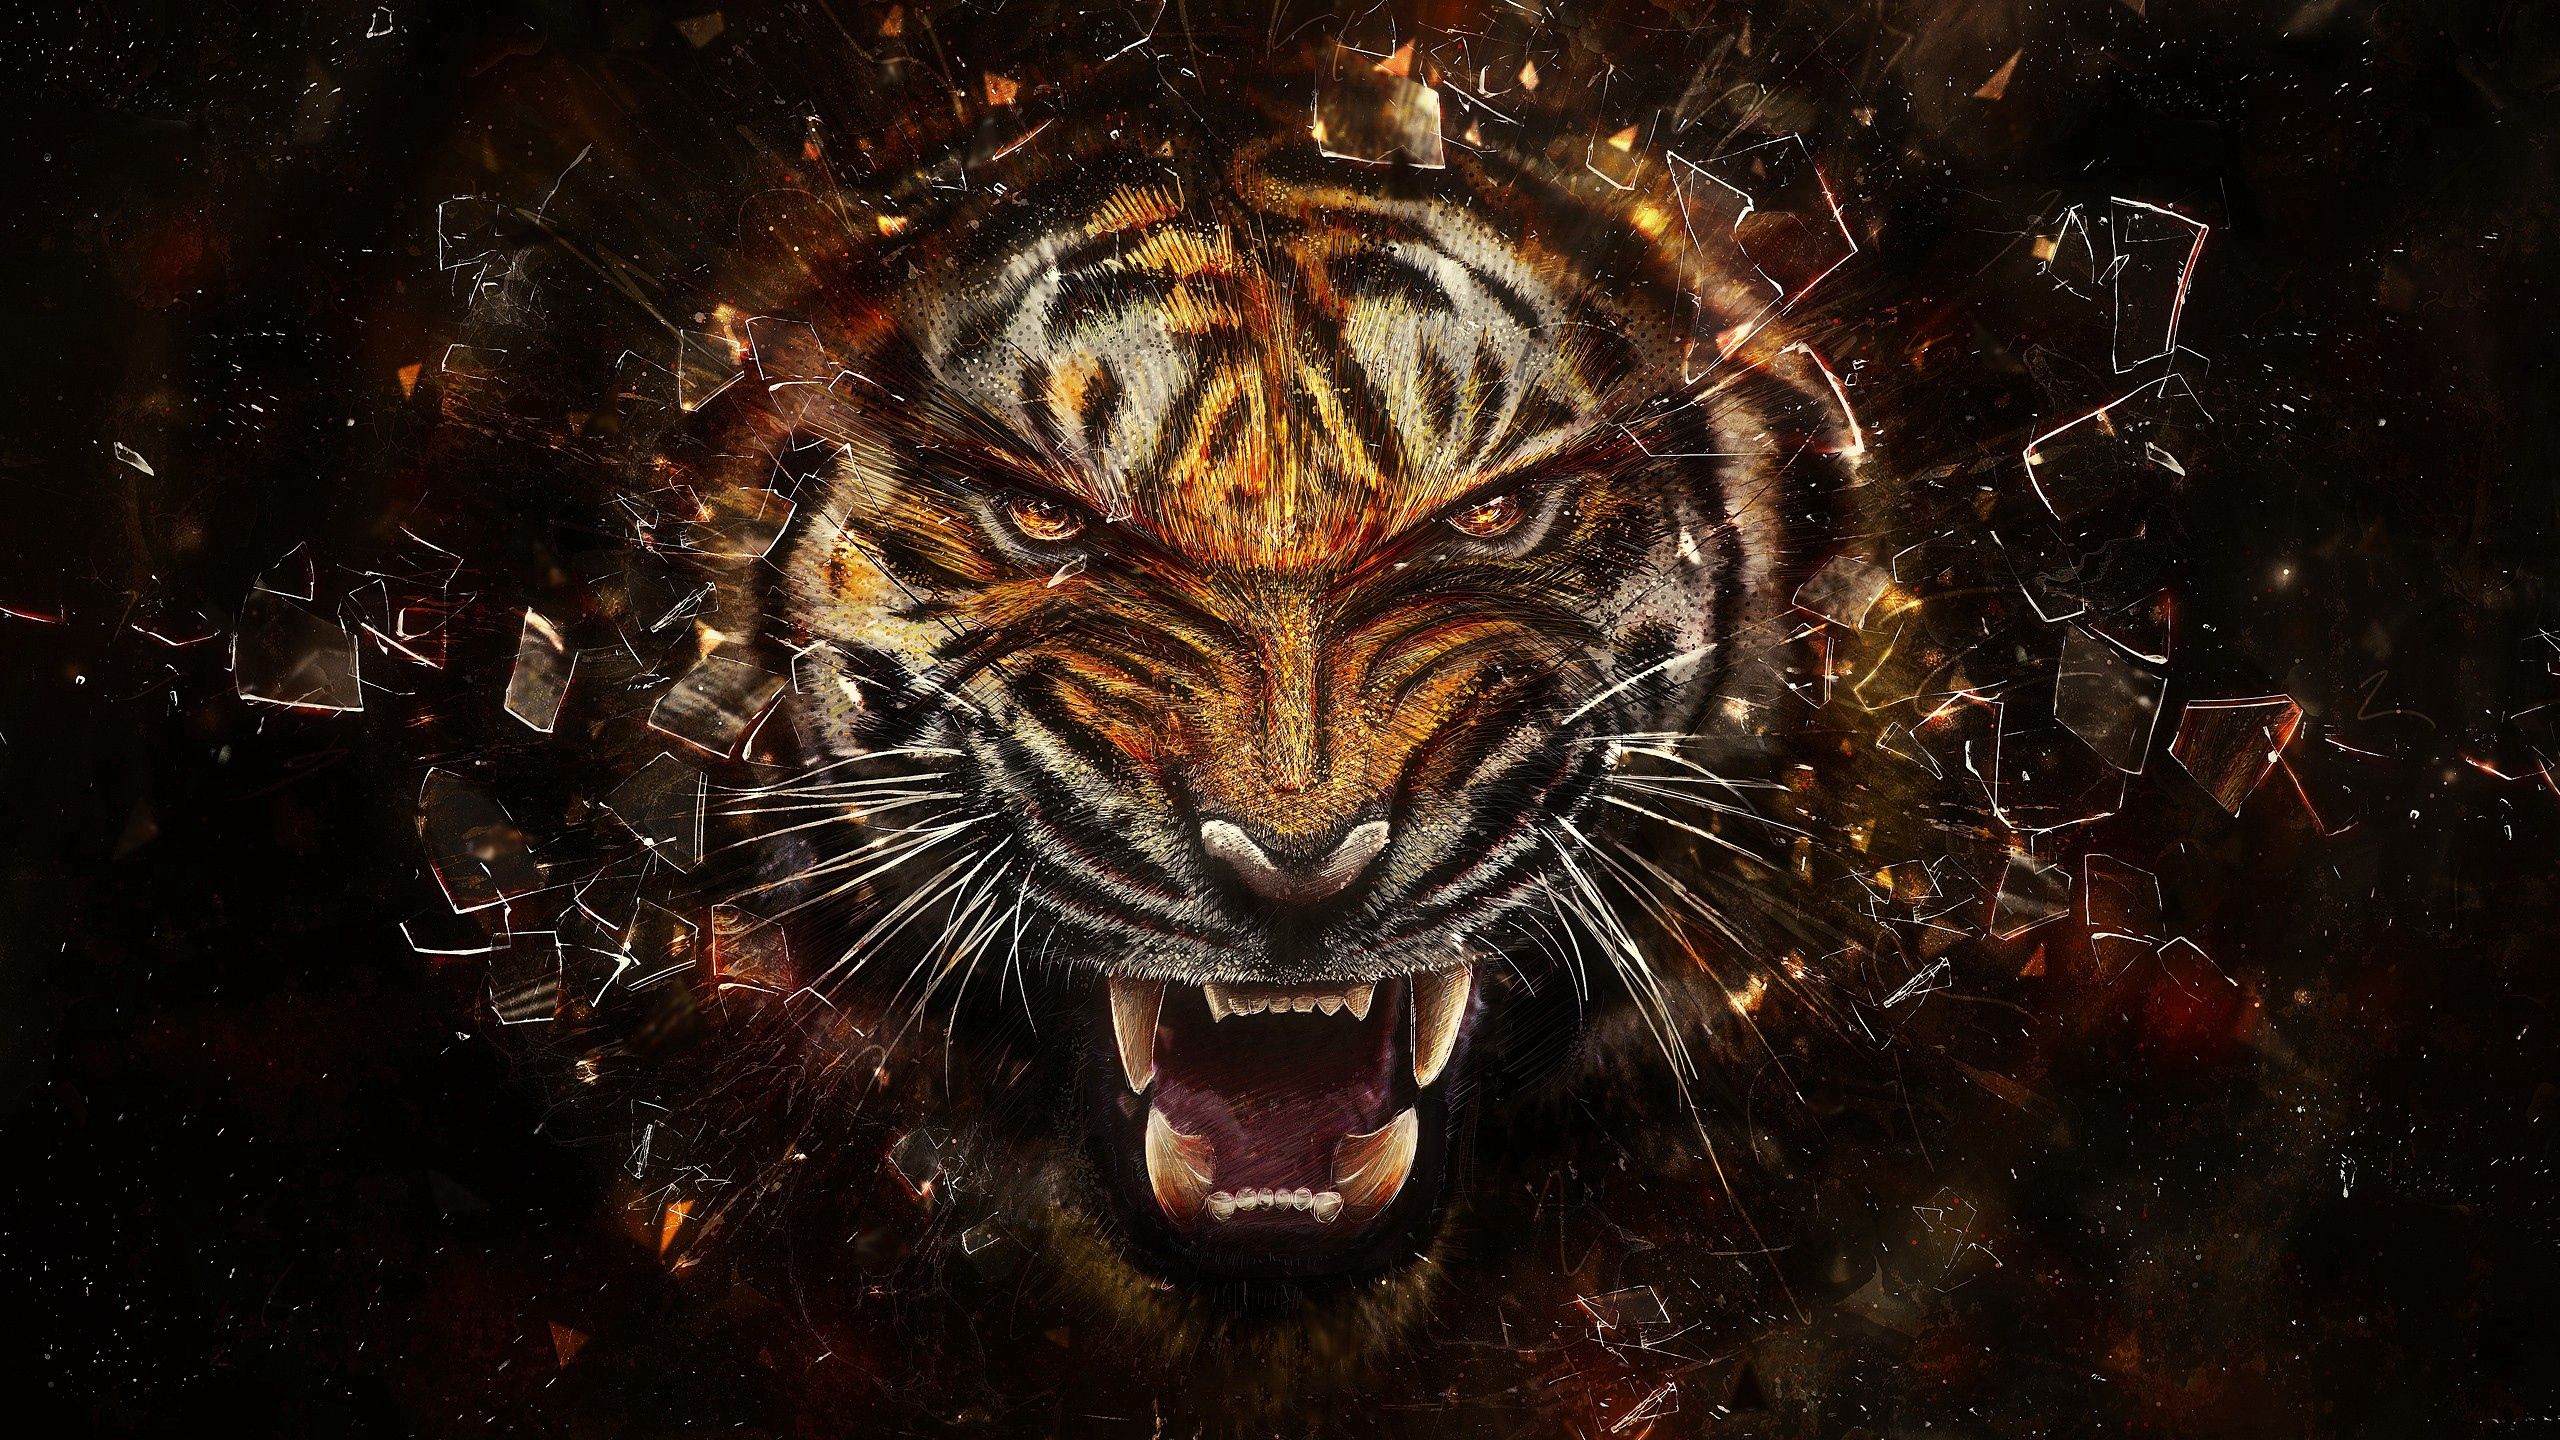 Best Tiger wallpapers for phone screen